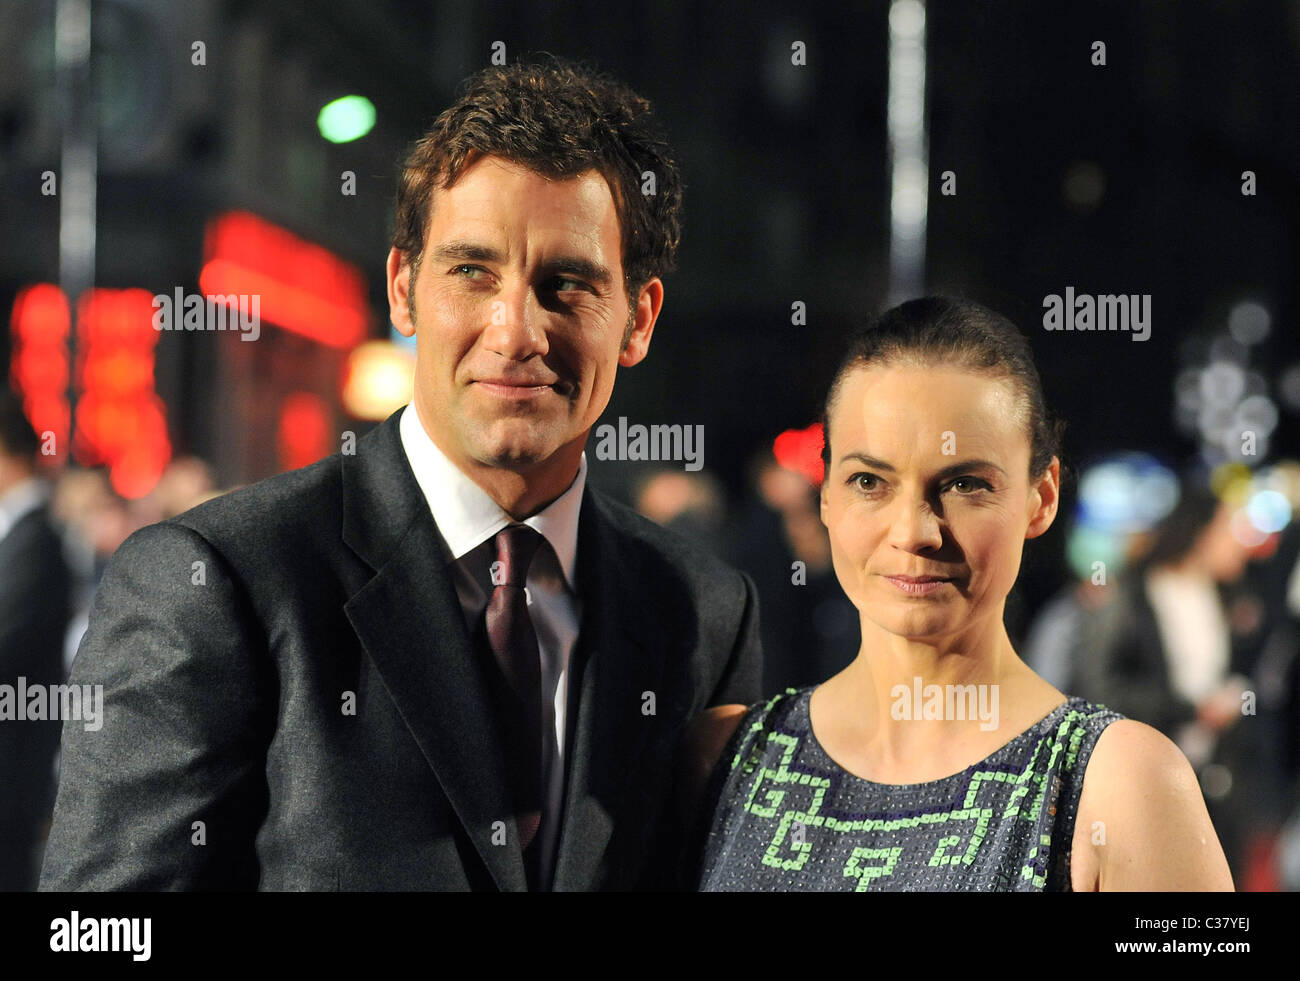 Clive Owen and wife Sarah Jane UK premiere of 'Duplicity' held at the Empire Leicester Square - Arrivals London, England - Stock Photo